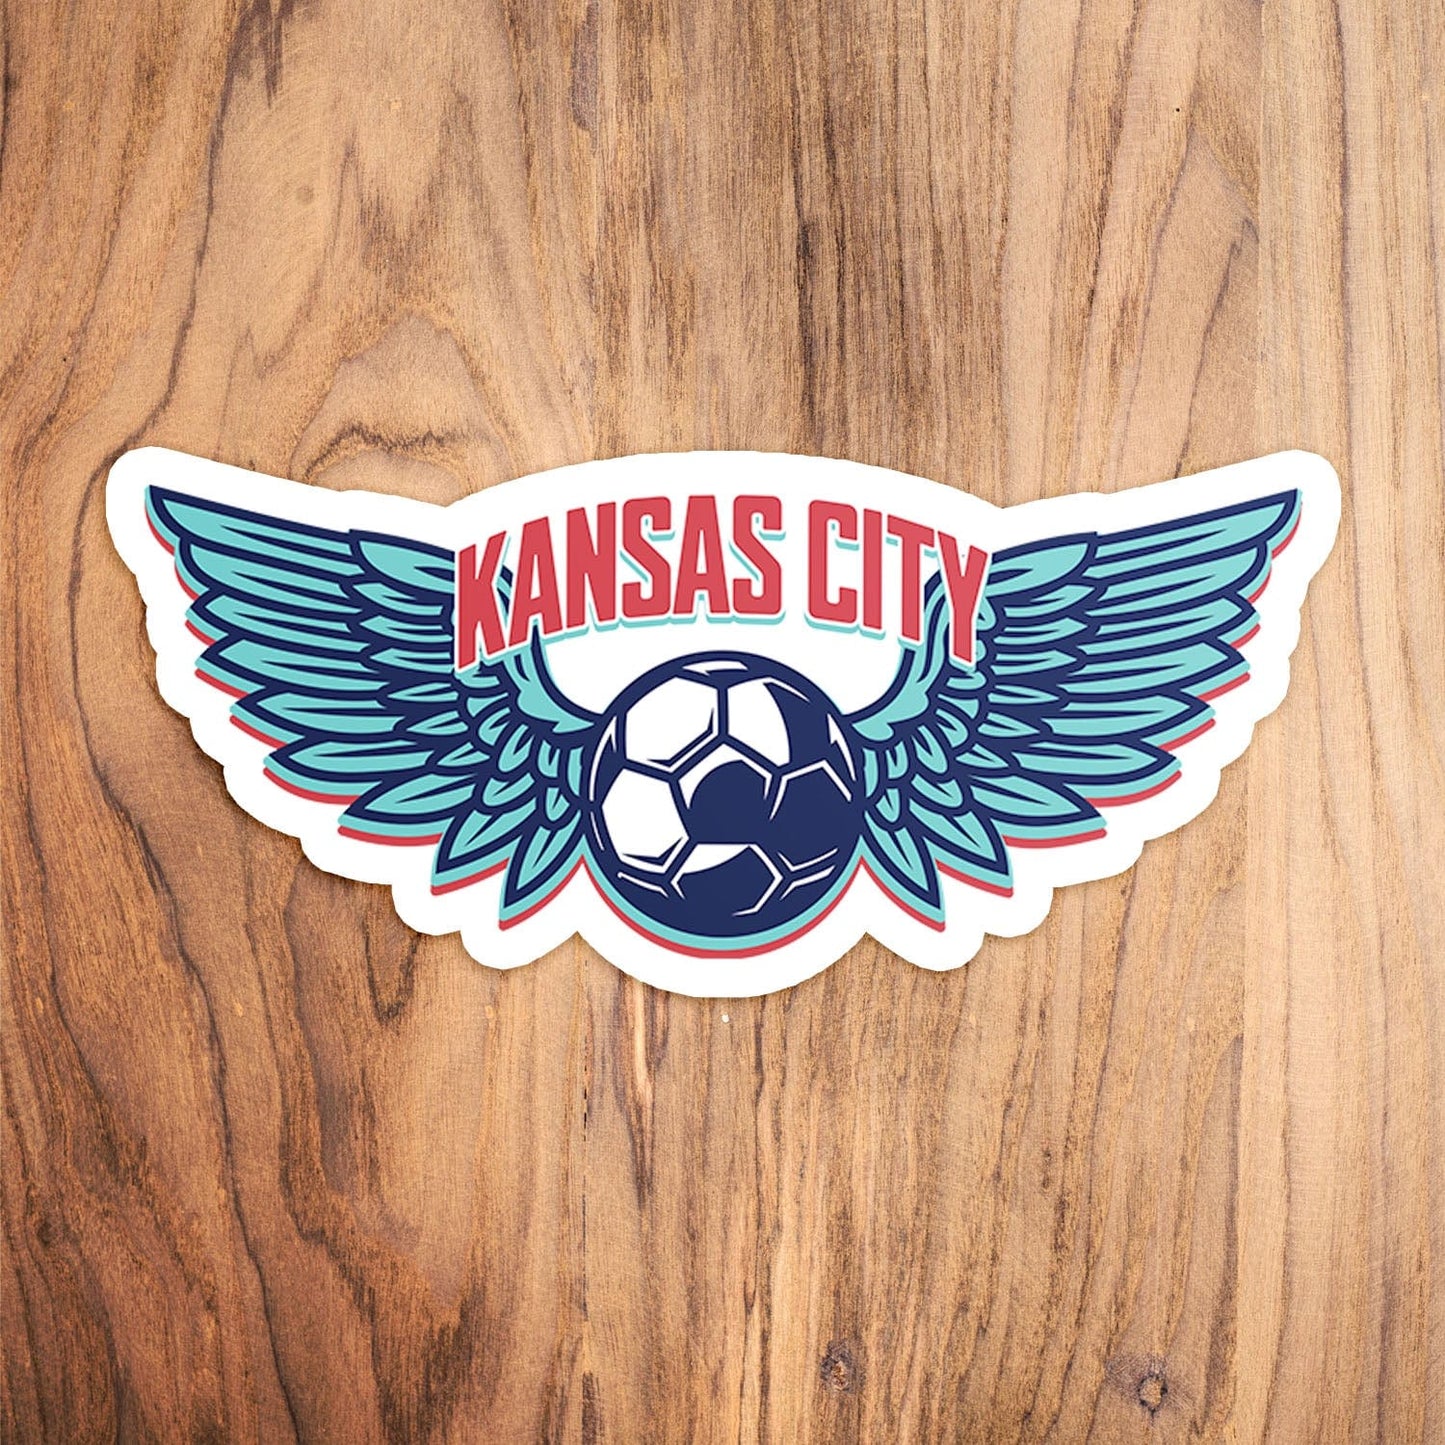 KC Swag Kansas City Current KC WING BALL die-cut sticker decal made from waterproof vinyl on wood table